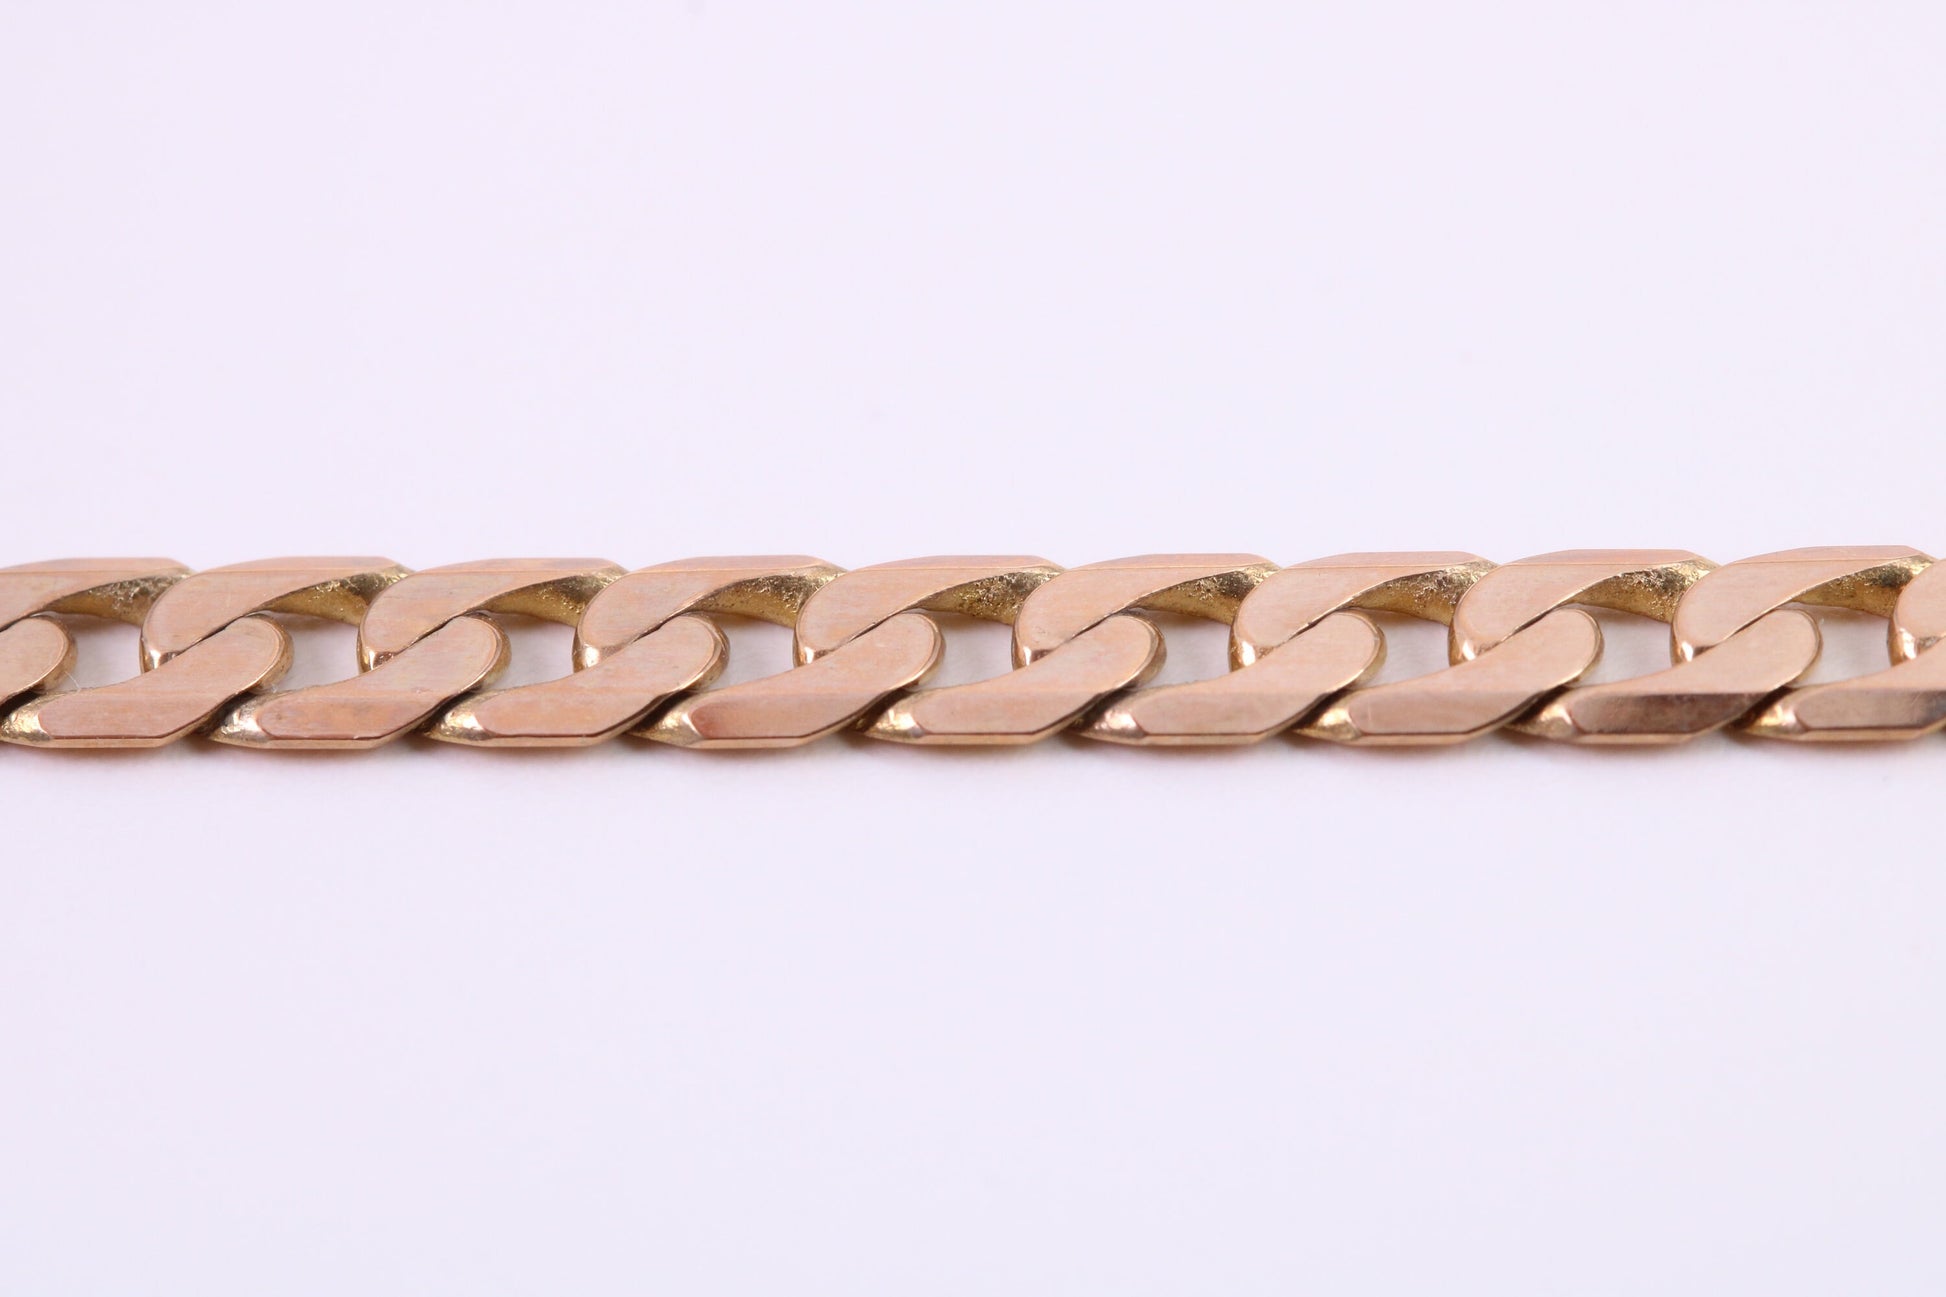 Diamond cut Curb Bracelet, Ideal for Ladies or Gents, Made From Solid Yellow Gold, British Hallmarked, Luxury Gift Boxed